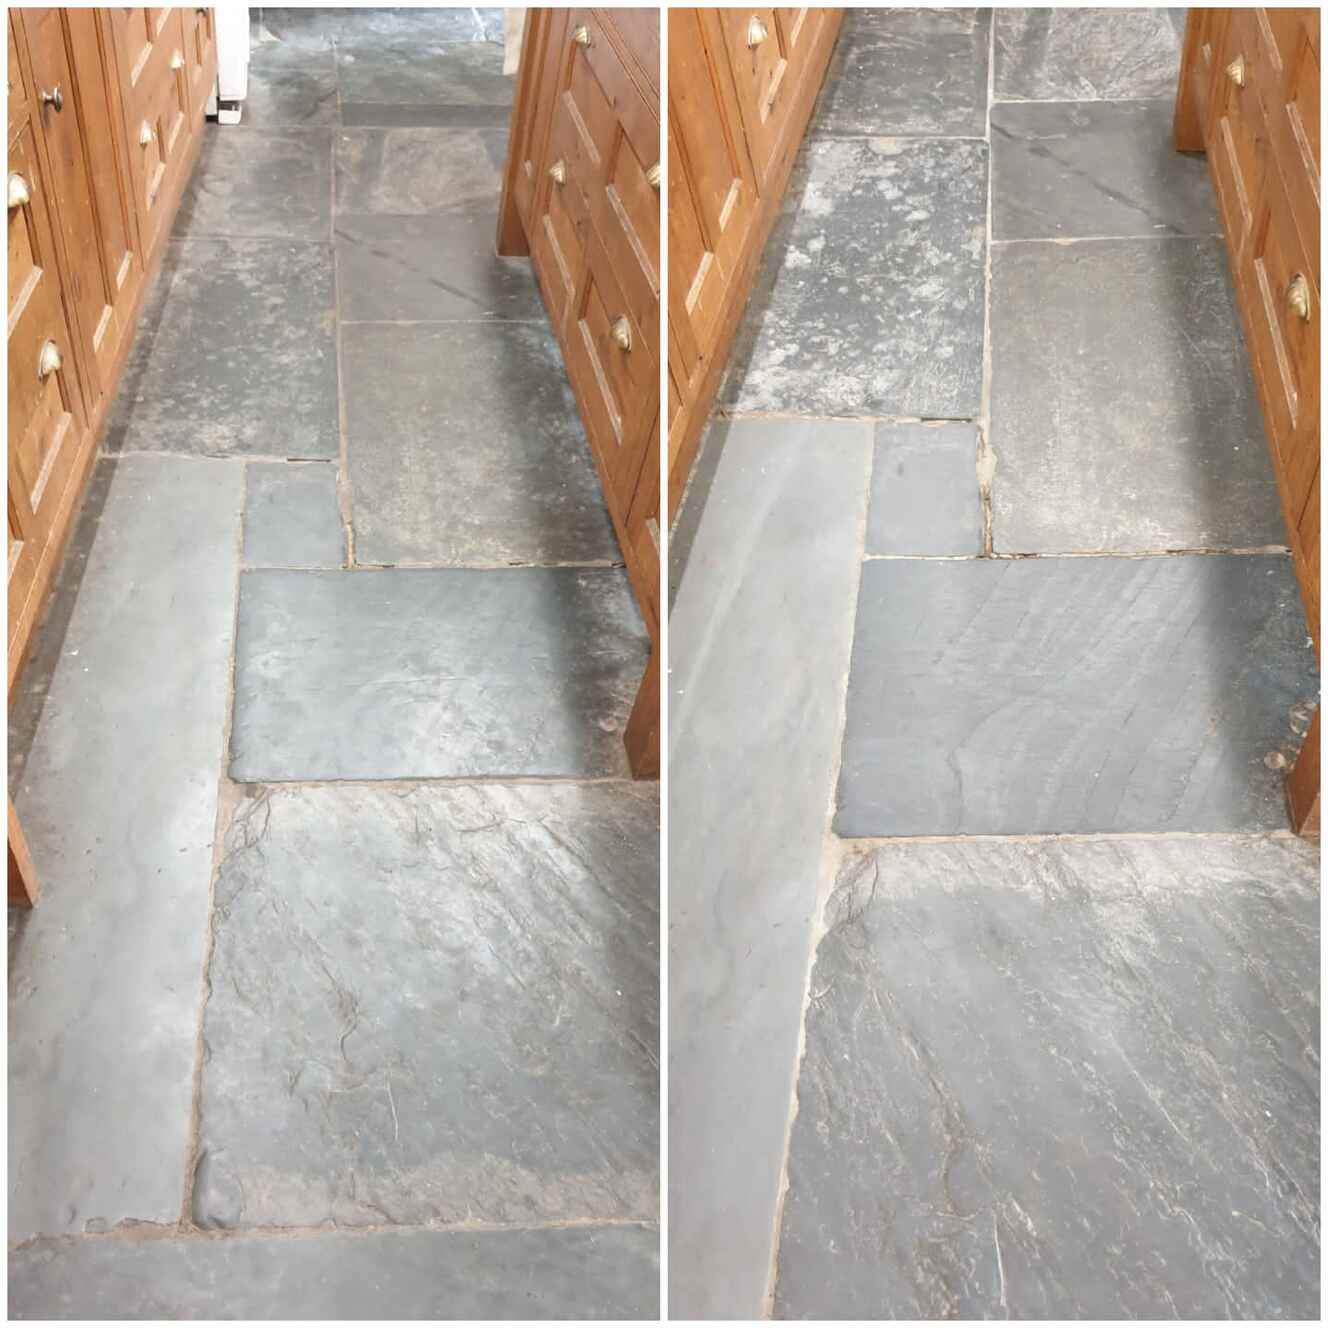 Hard floor cleaning before and after